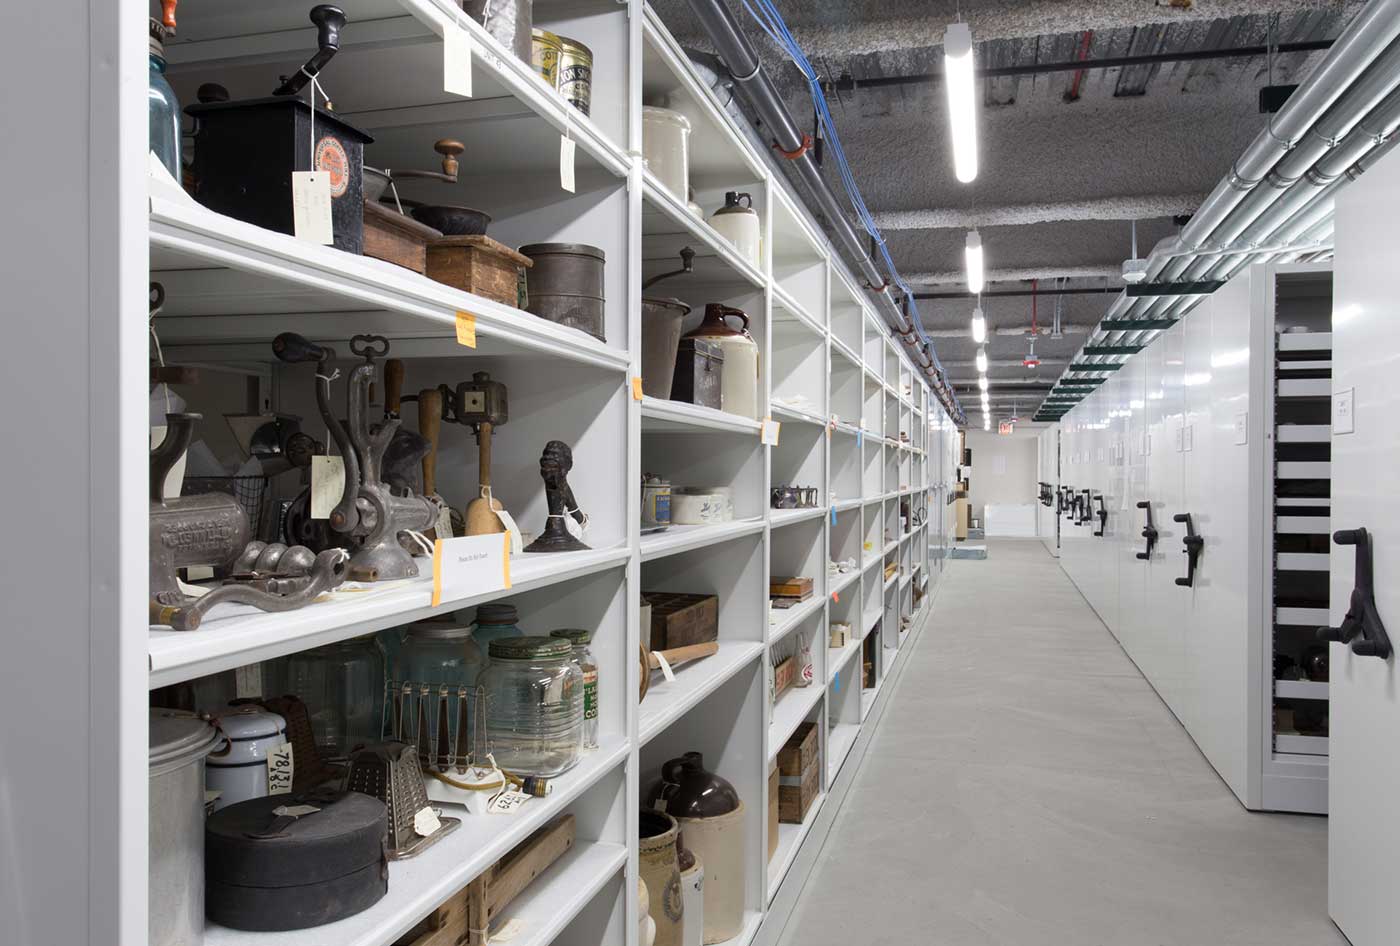 Dunn museum collection of artifacts on high-density mobile storage system